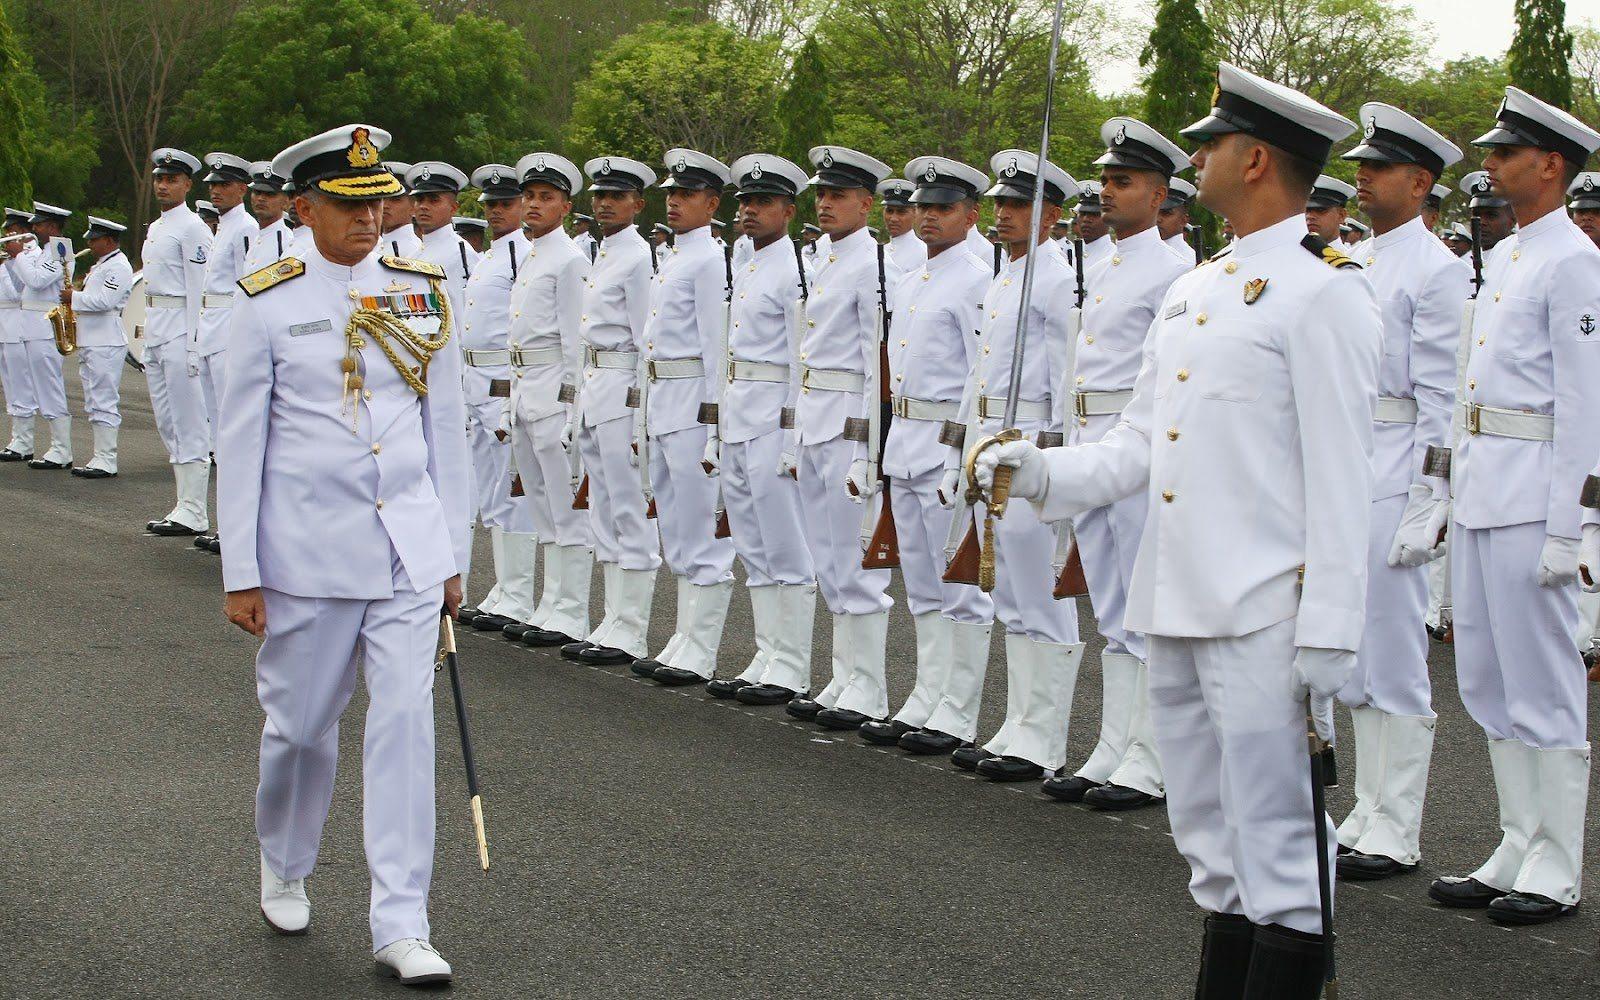 Indian Coast Guard launched “PADMA” centralised payment system